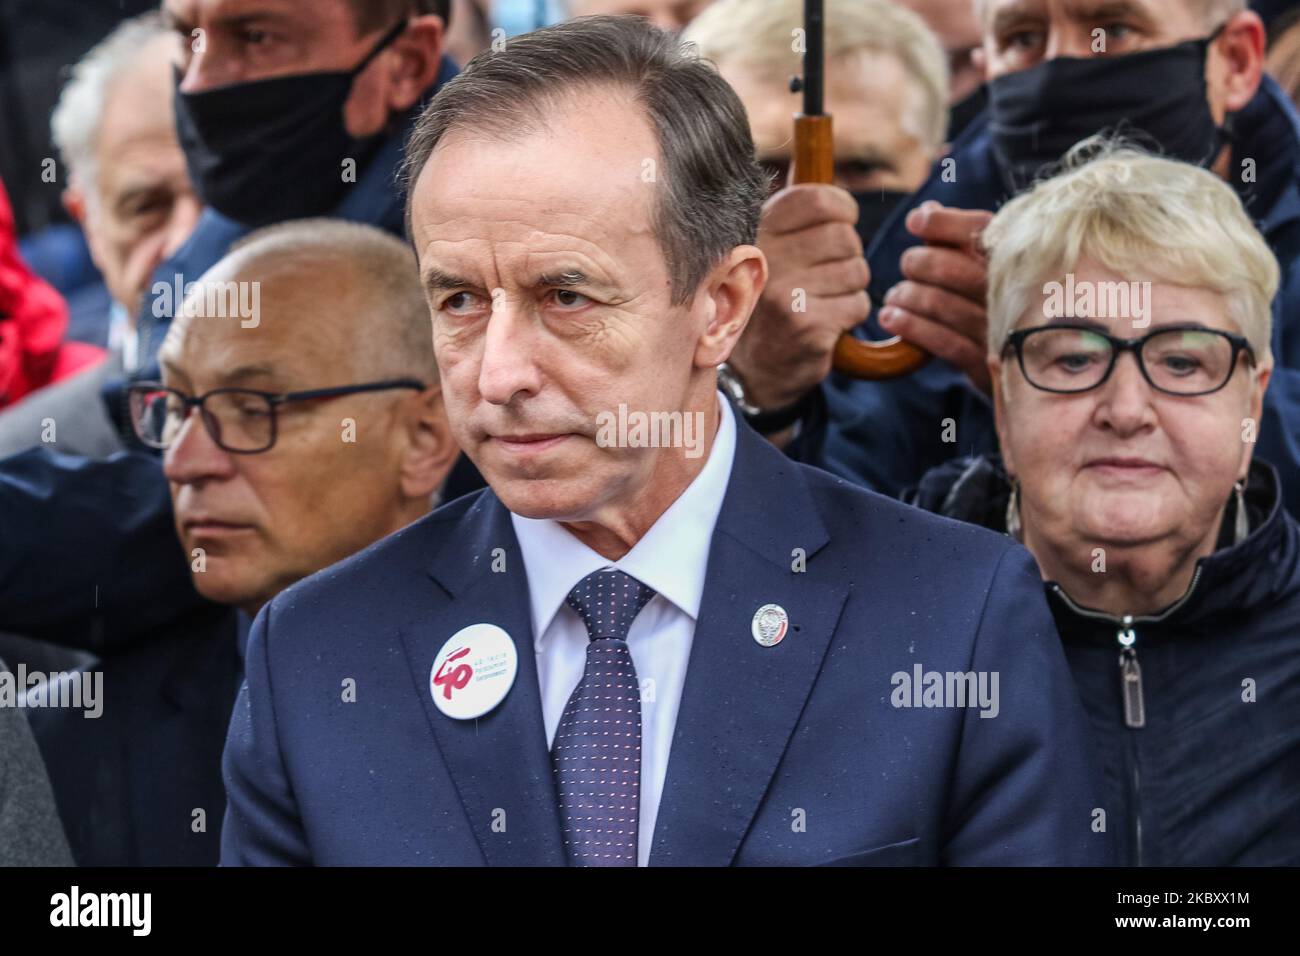 Marshal of the Senate Tomasz Grodzki (R) is seen in Gdansk, Poland, on August 31, 2020 , Lech Walesa and other oppositional parties leaders and members celebrate anniversary of August Agreements in Gdansk on the Solidarity Square in Gdansk (Photo by Michal Fludra/NurPhoto) Stock Photo